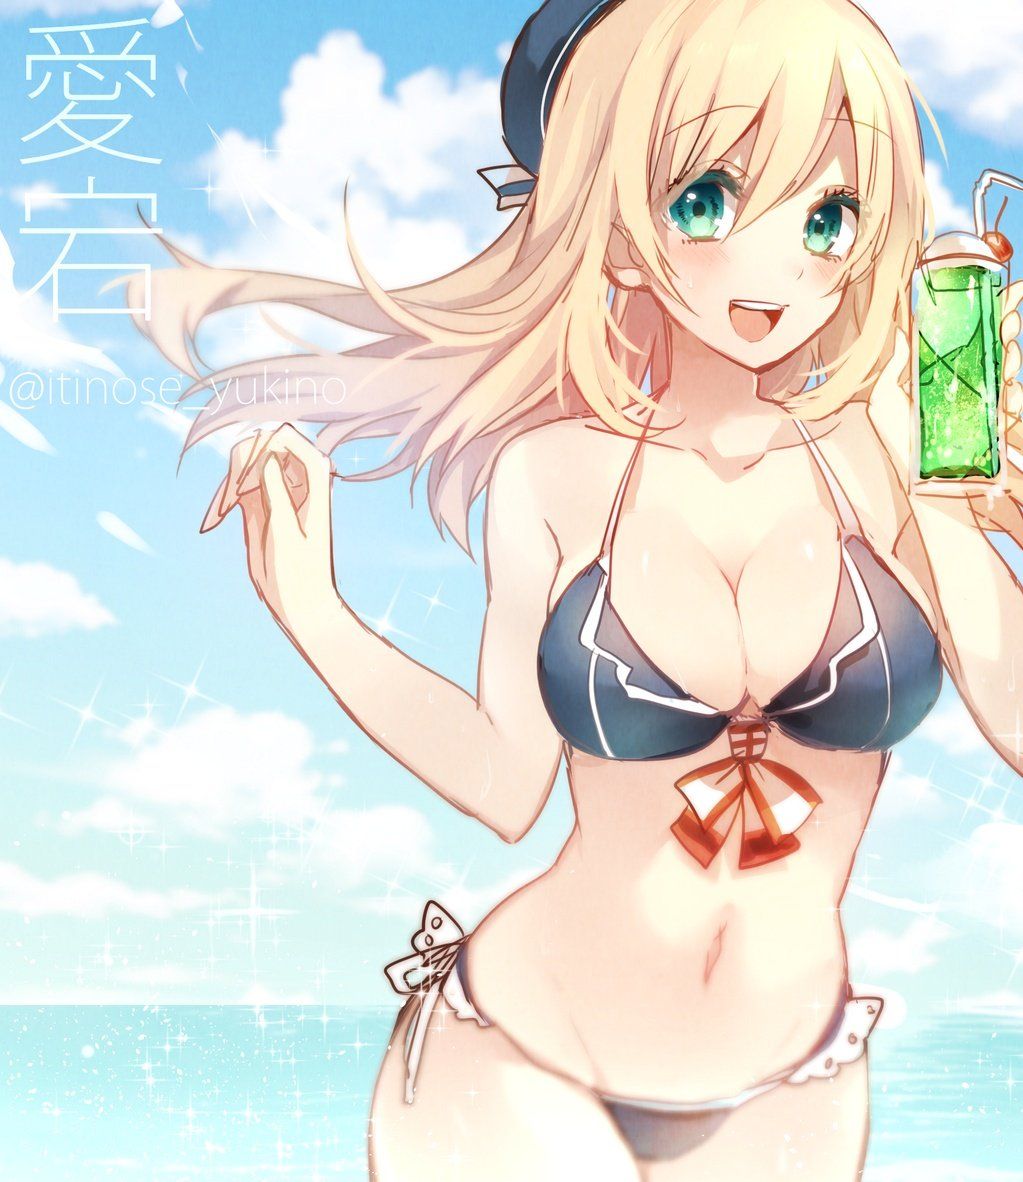 It might be tired and good that it was healed in the swimsuit of lewd image of a pretty girl swimsuit 4